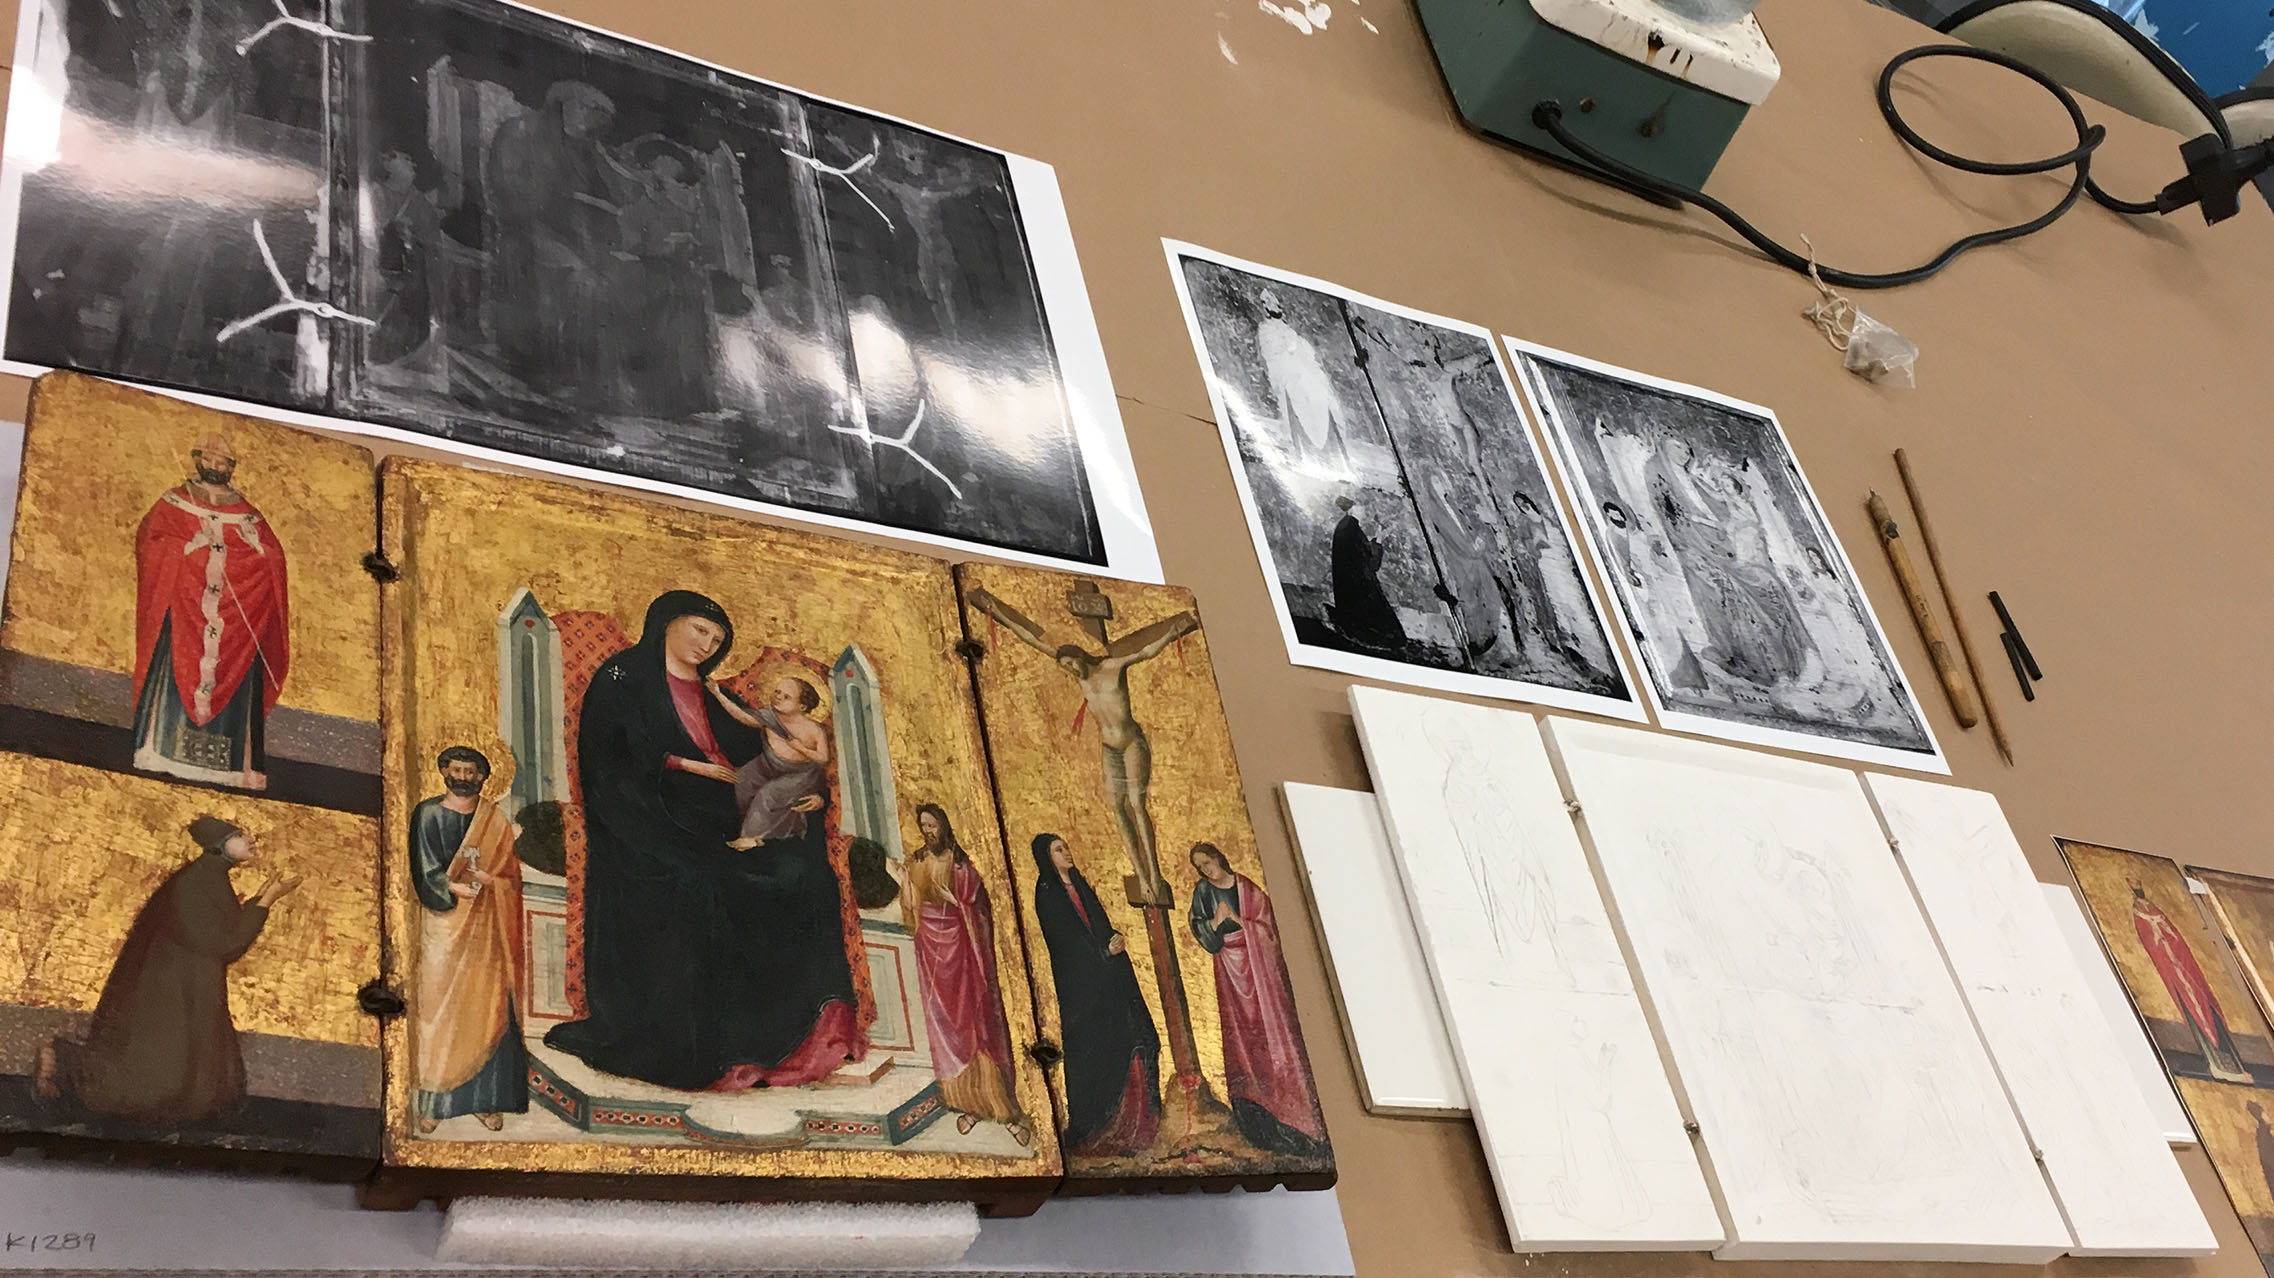 View of the artwork and in-progress reconstruction, along with printouts of technical imaging